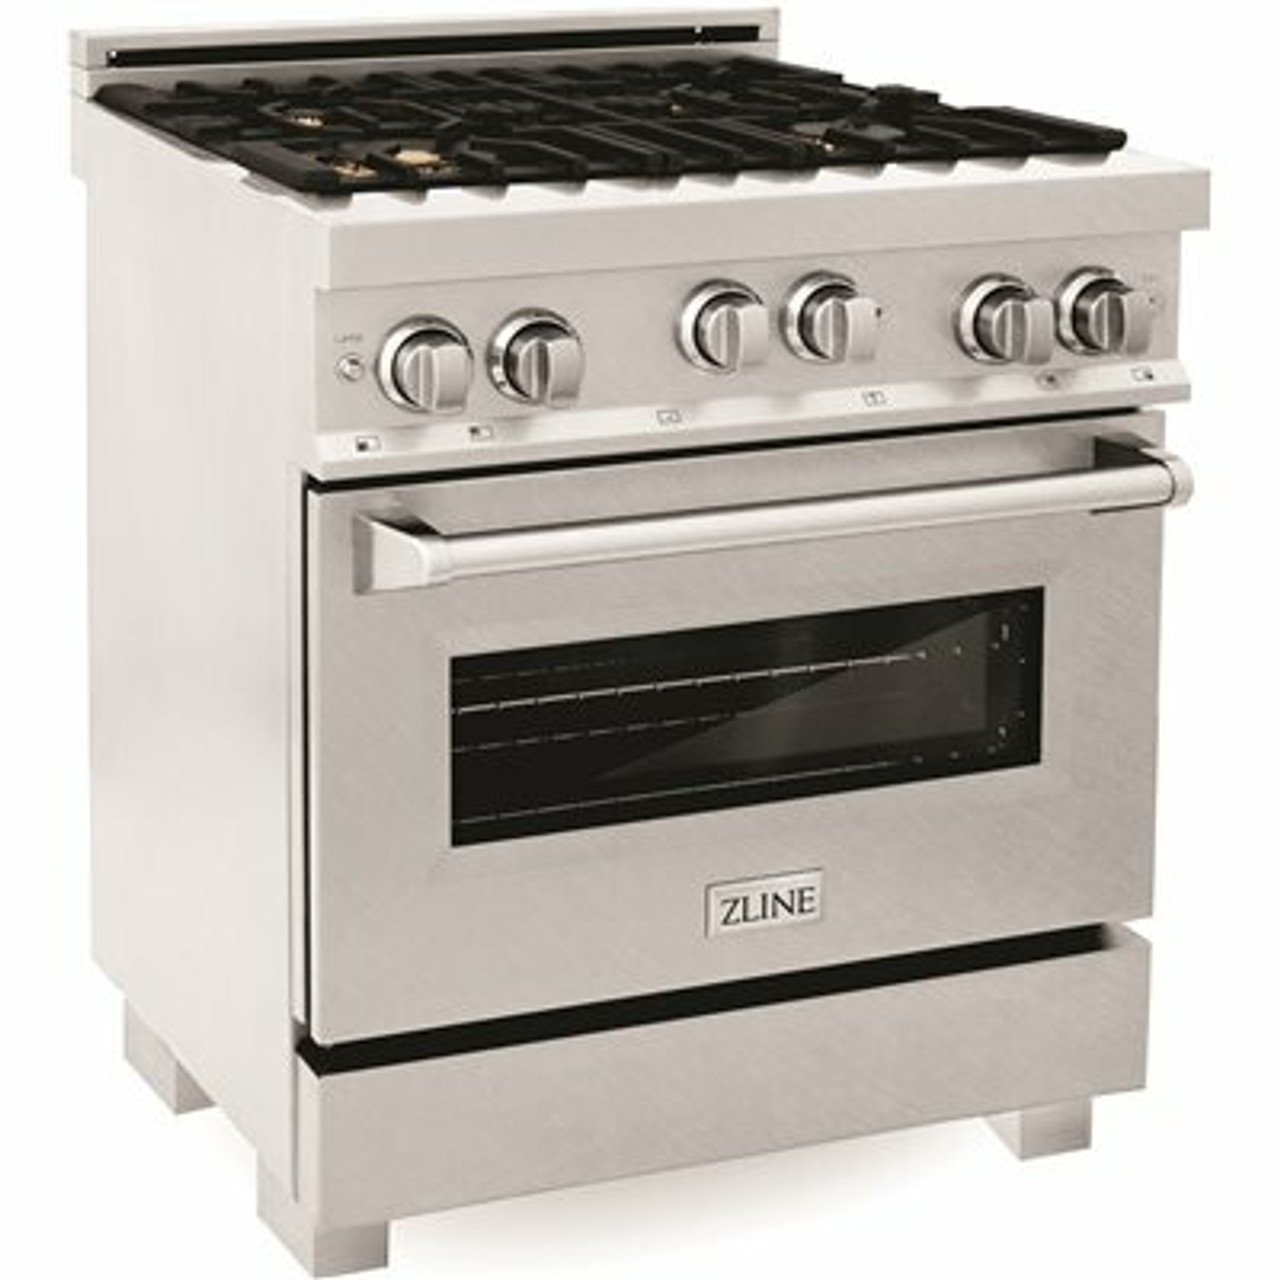 Zline 30 In. 4.0 Cu. Ft. Range With Gas Stove And Gas Oven In Durasnow Stainless Steel With Brass Burners (Rgs-Sn-Br-30)